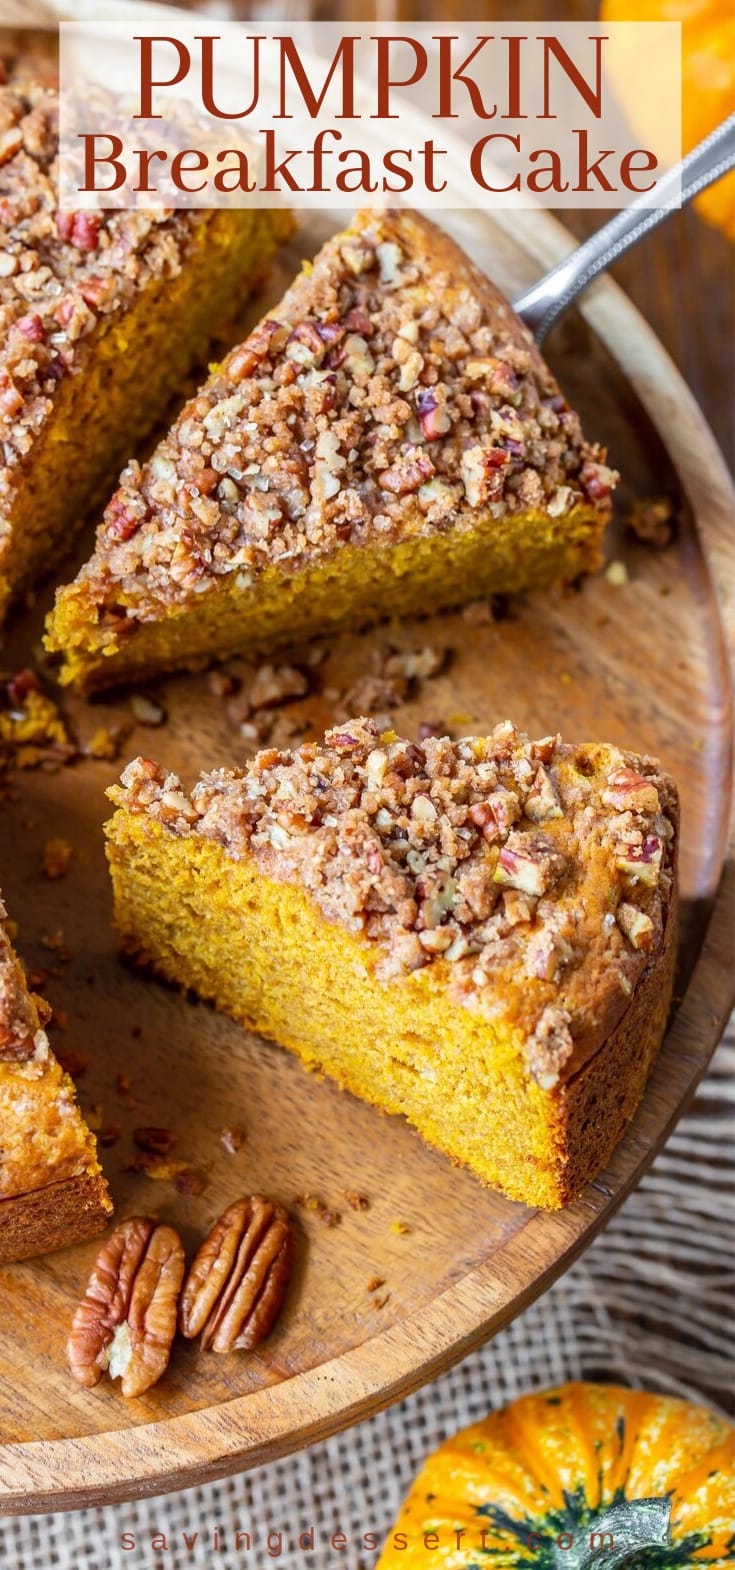 A sliced pumpkin breakfast cake on wooden cake plate with a pecan crumble topping